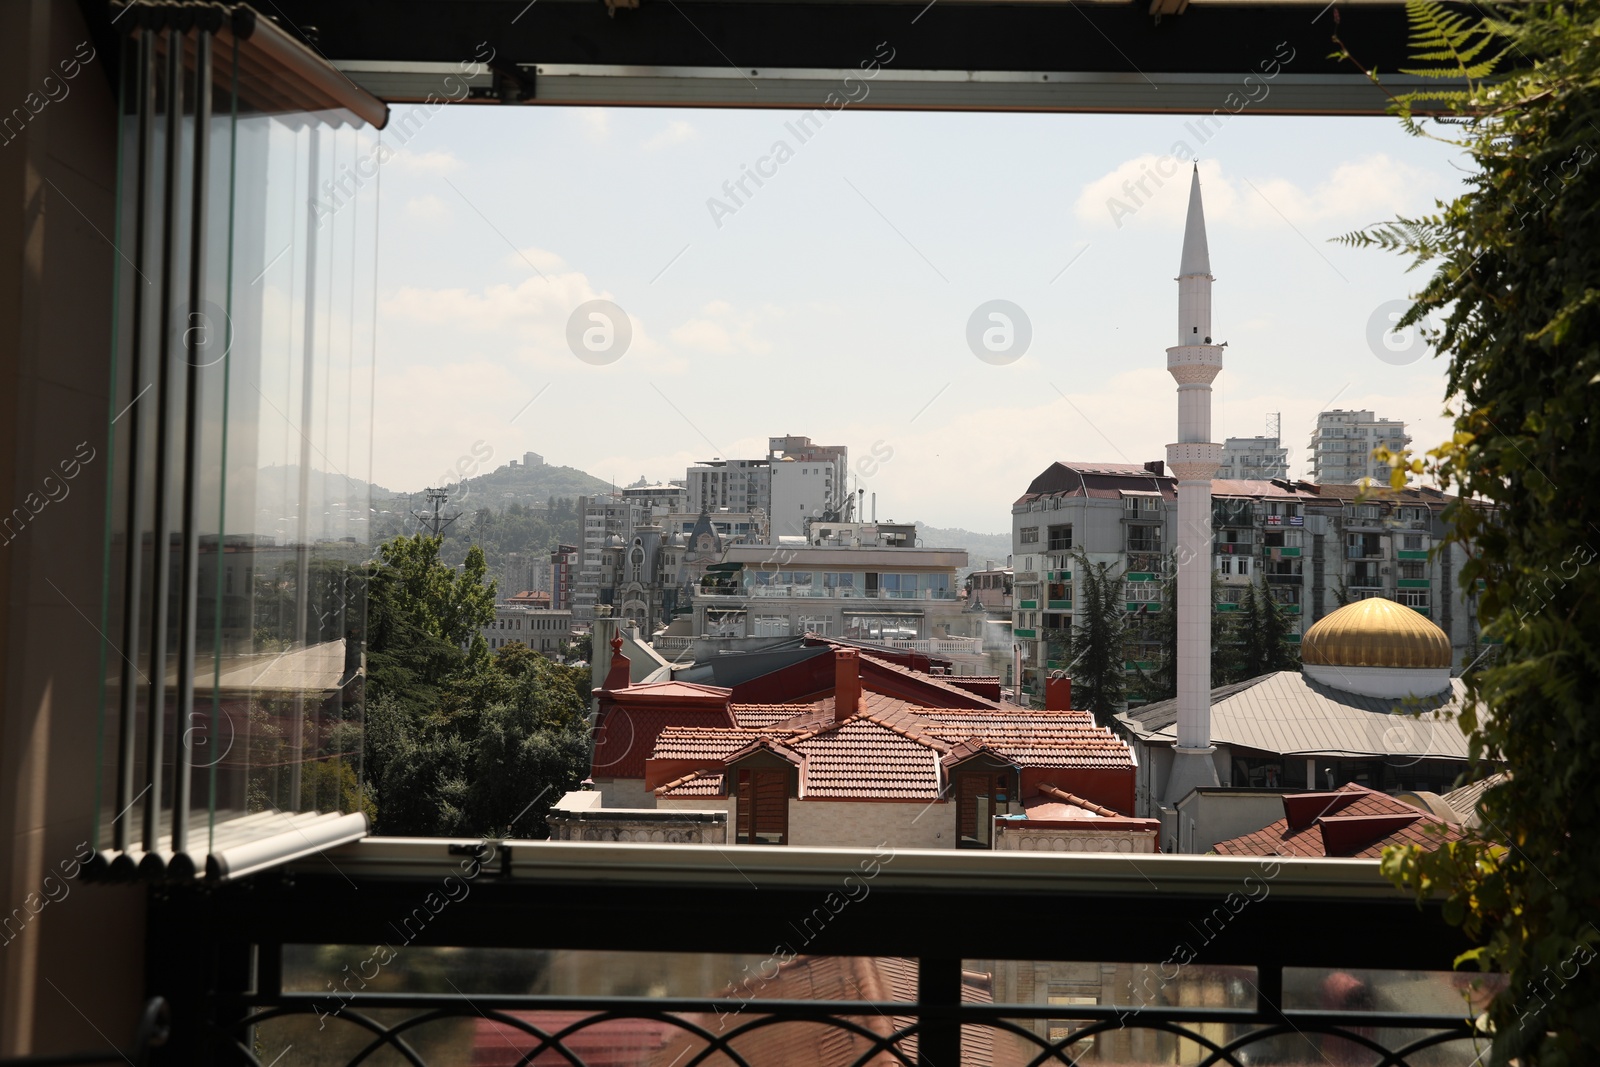 Photo of BATUMI, GEORGIA - AUGUST 28, 2022: Cityscape with modern buildings, view from window